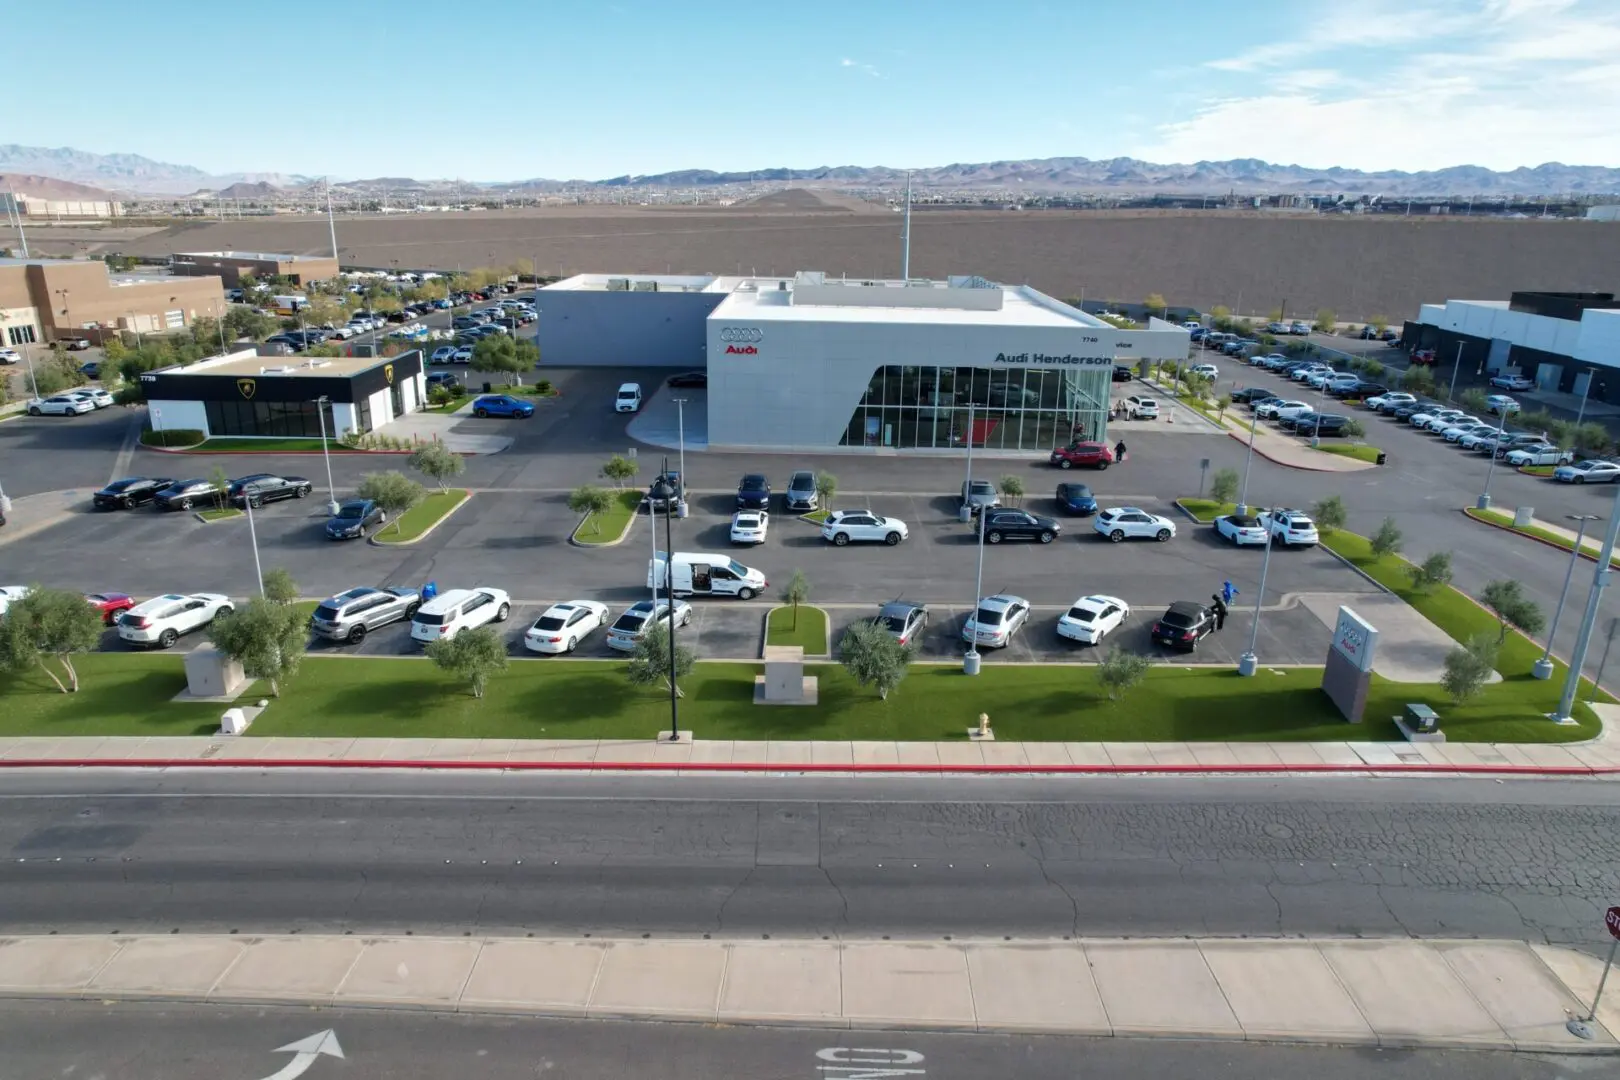 Aerial view of the audi parking area